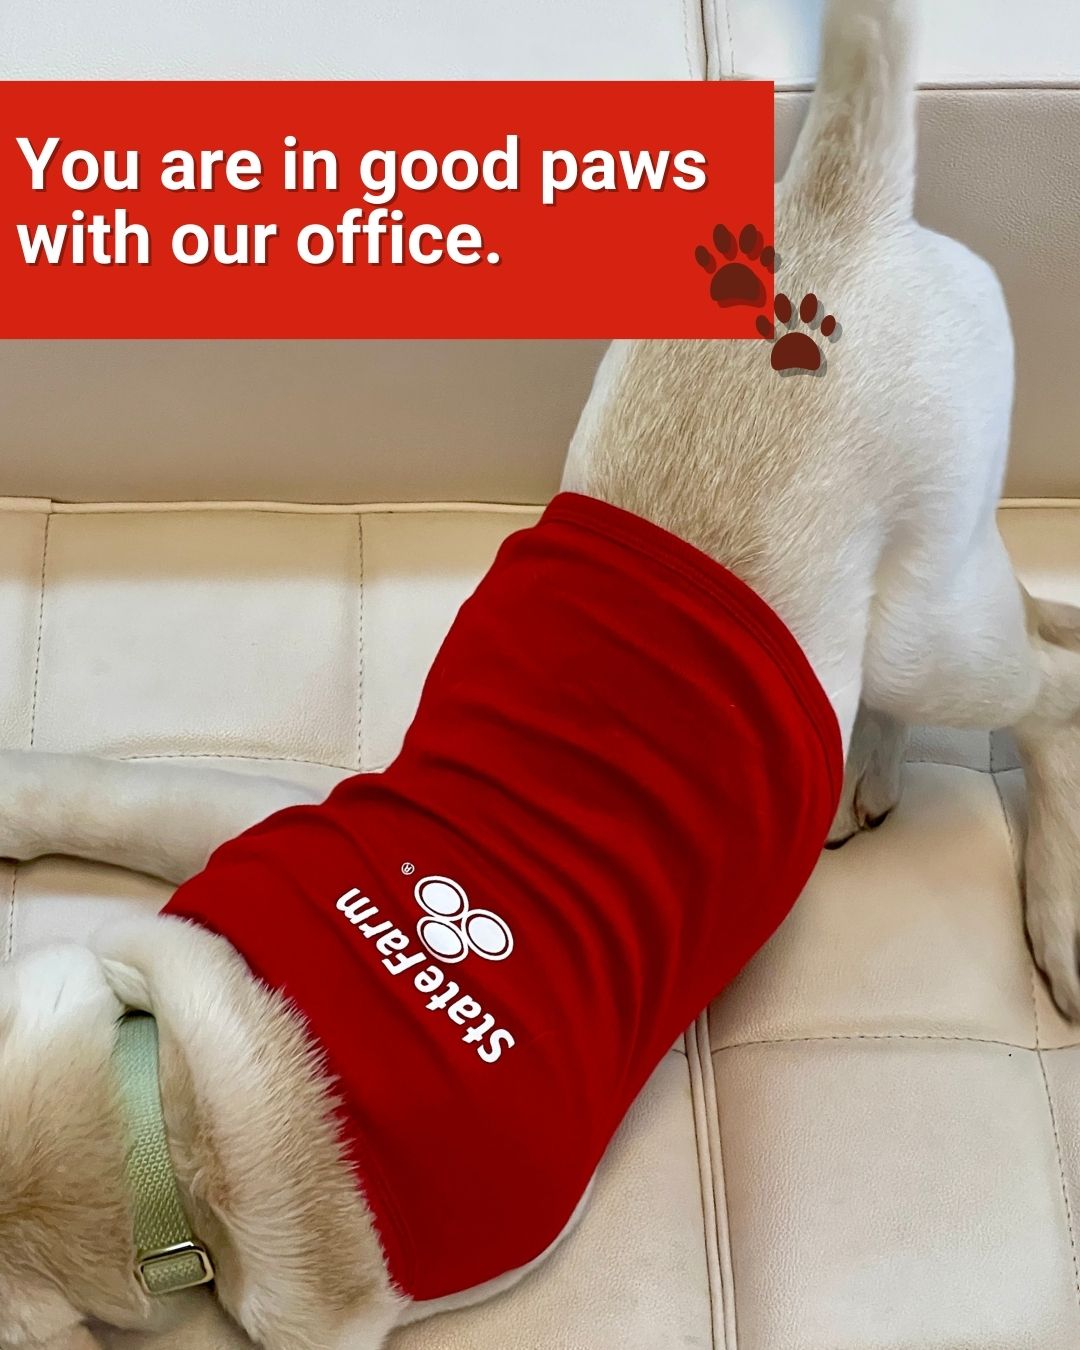 You're in good paws with our office.  Happy National Pet Day! Michael Popwell - State Farm Insurance Agent Suwanee (470)202-6131